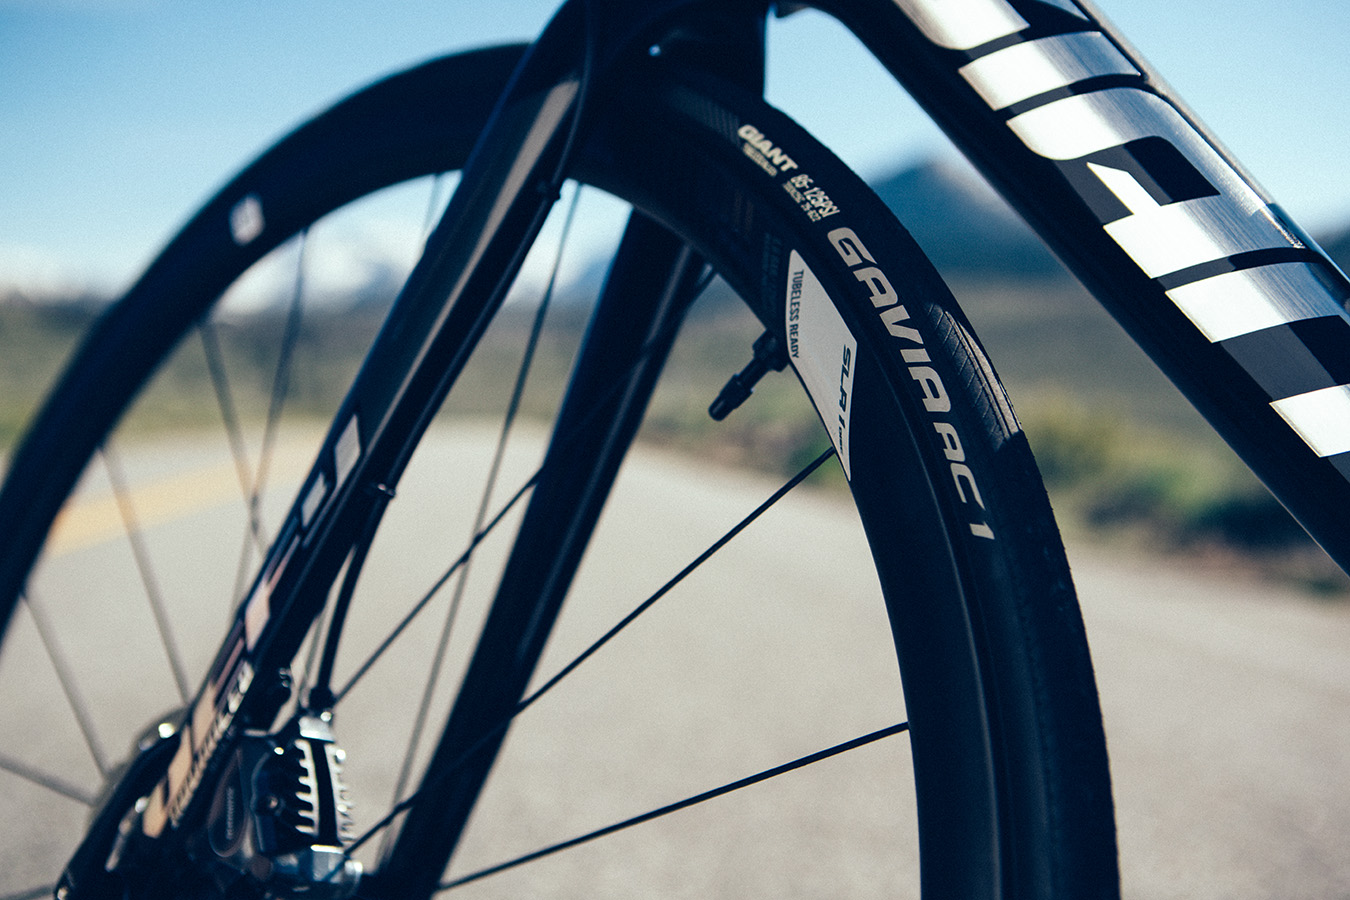 2019 GIANT Bicycles | Gavia SLR/SL Tubeless On-Road Tires